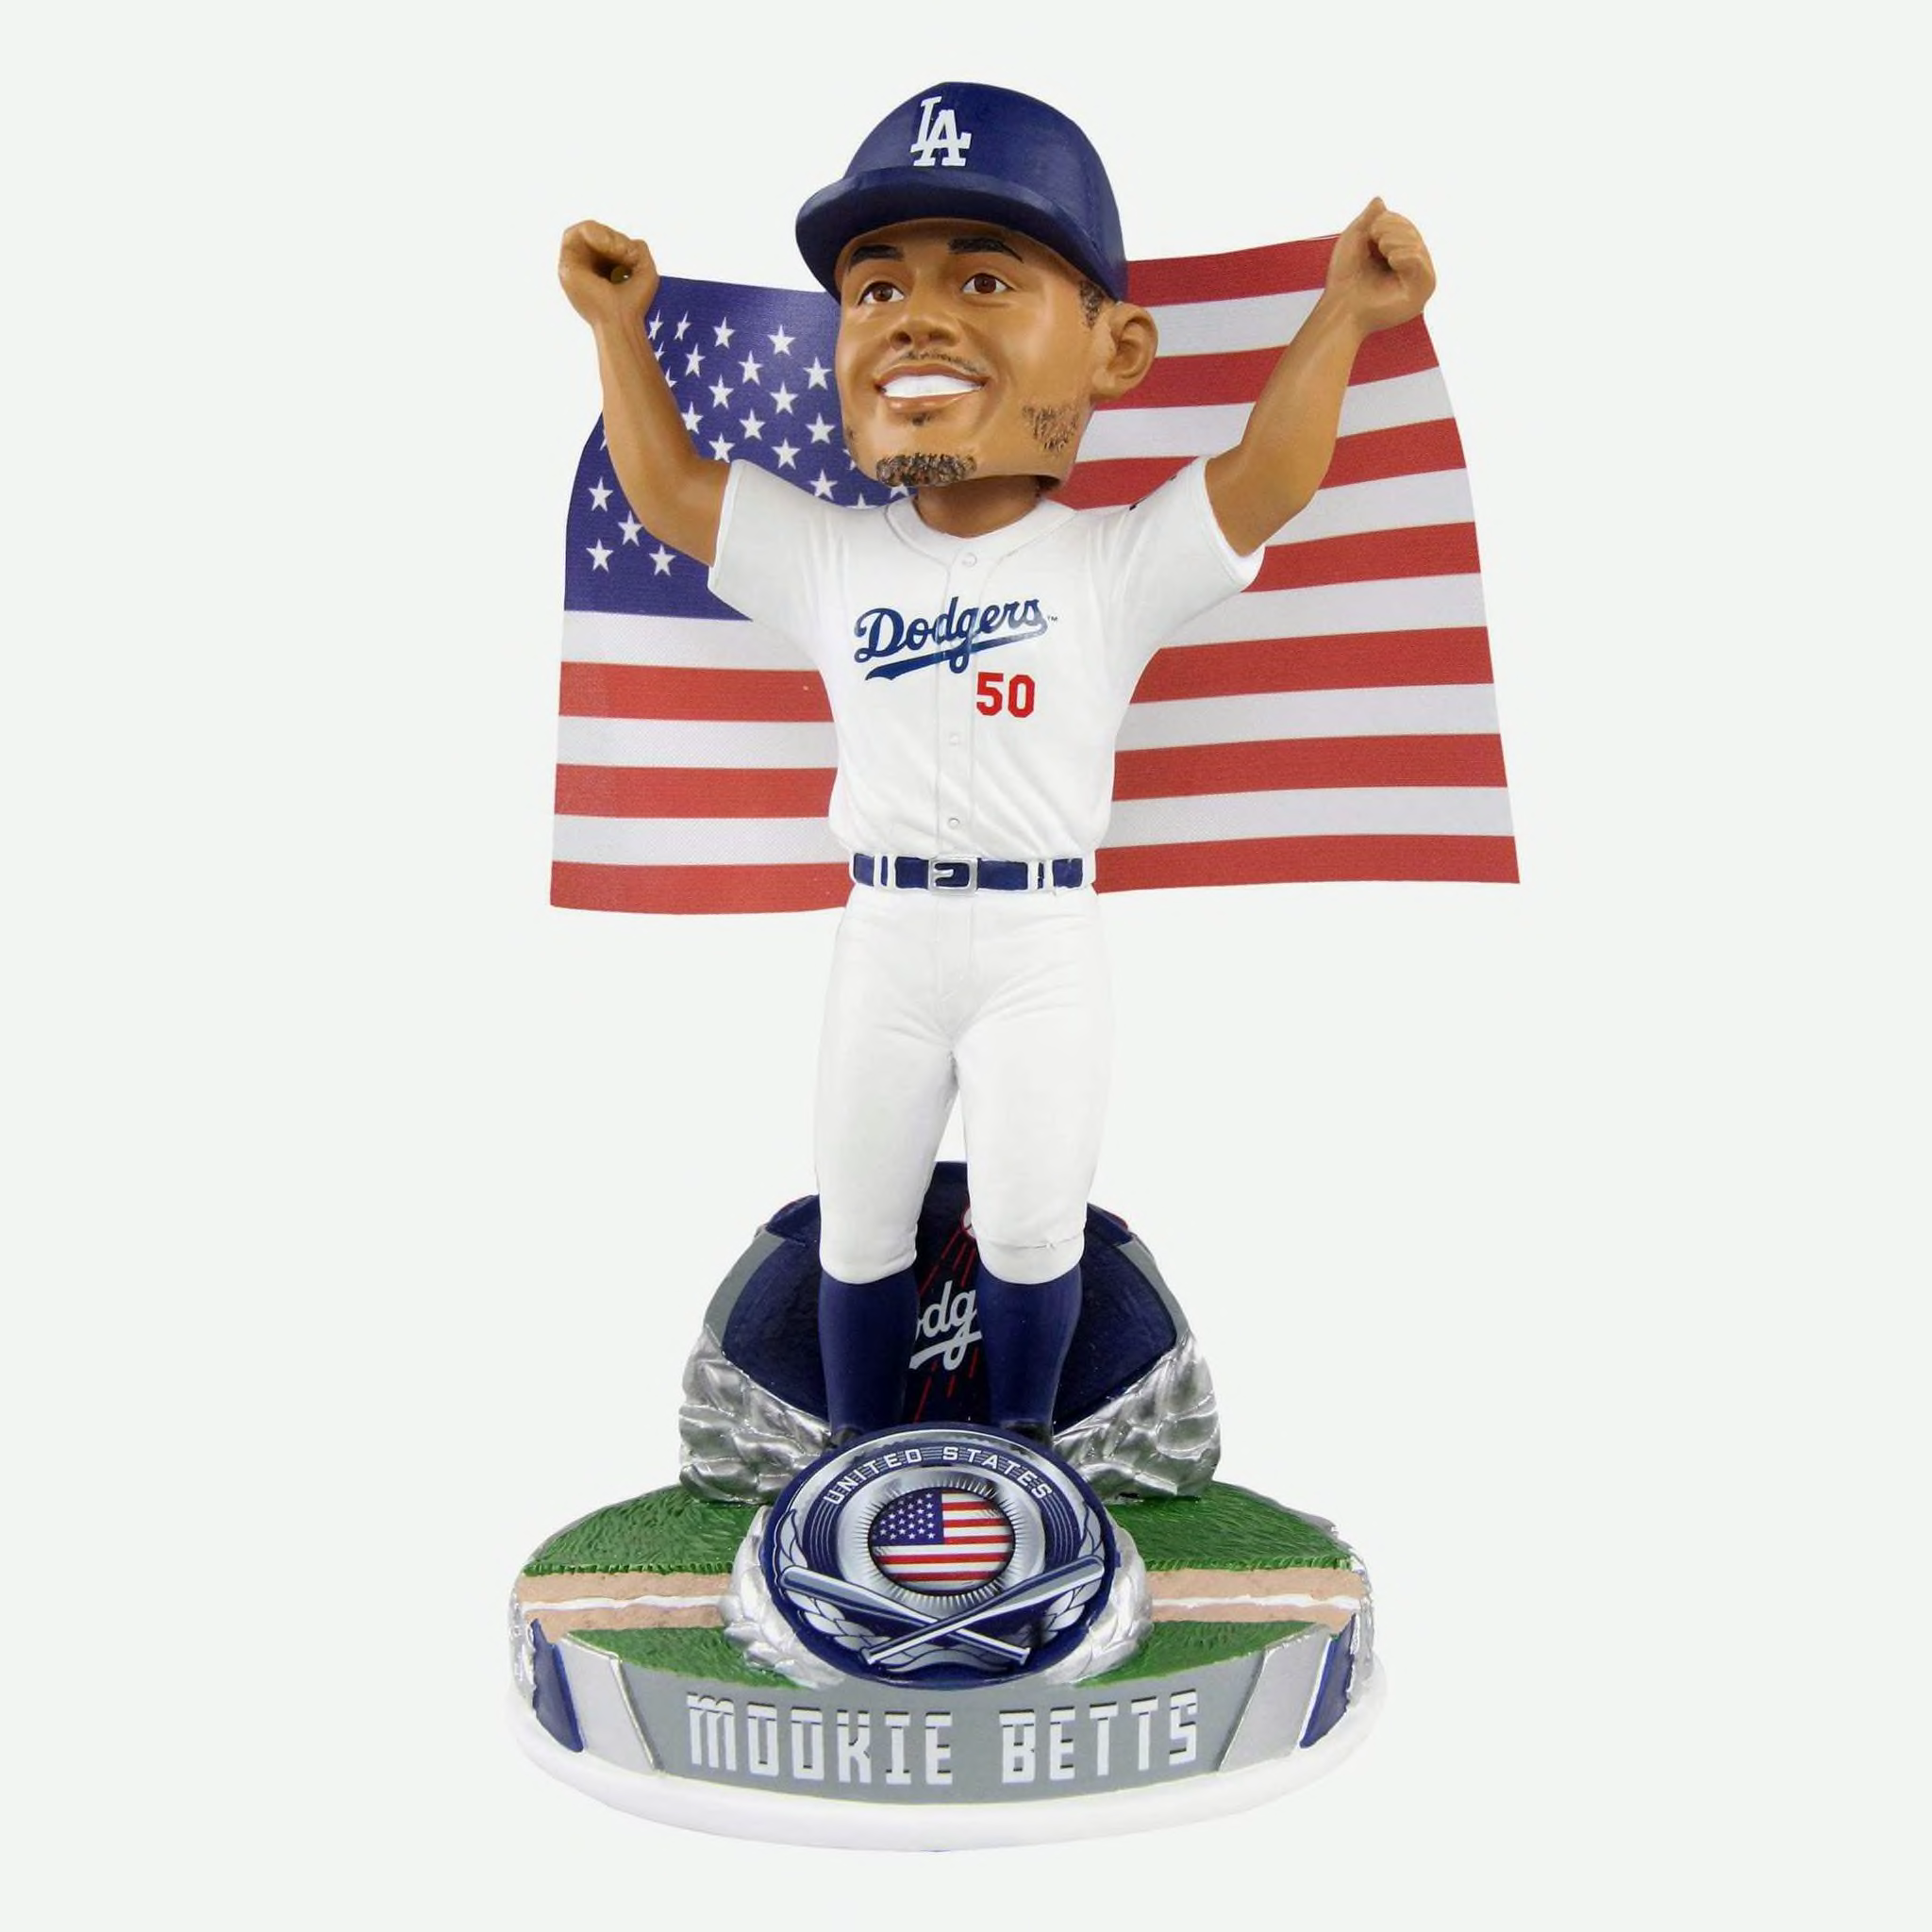 Showcase your Dodgers fandom with this limited Mookie Betts bobblehead